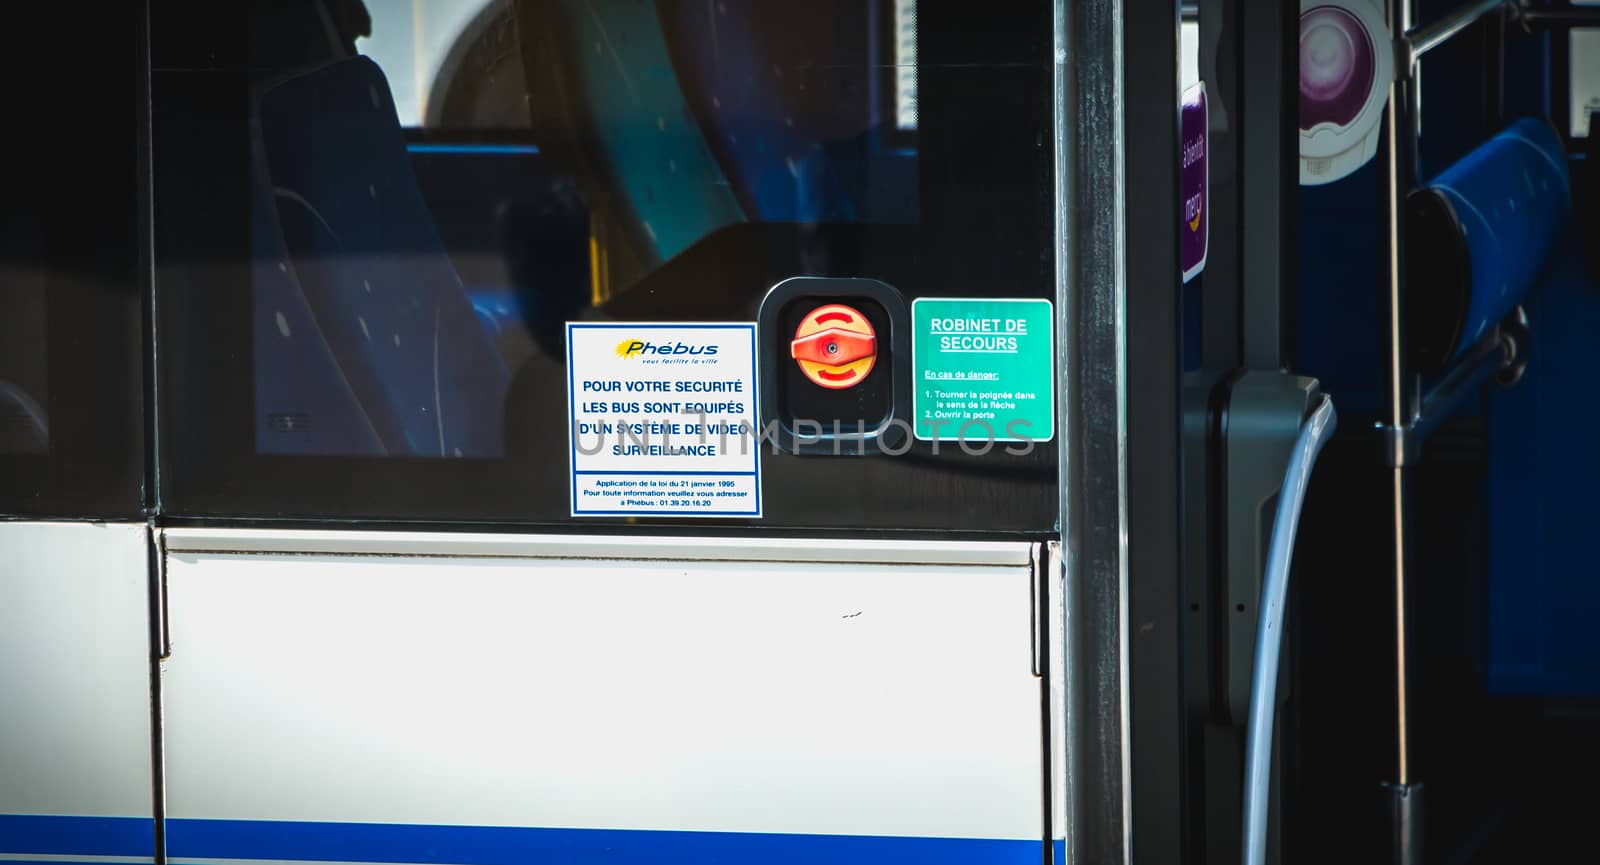 Versailles, France - October 9th, 2017: Sign in French on a bus - For your safety the buses are equipped with a video surveillance system